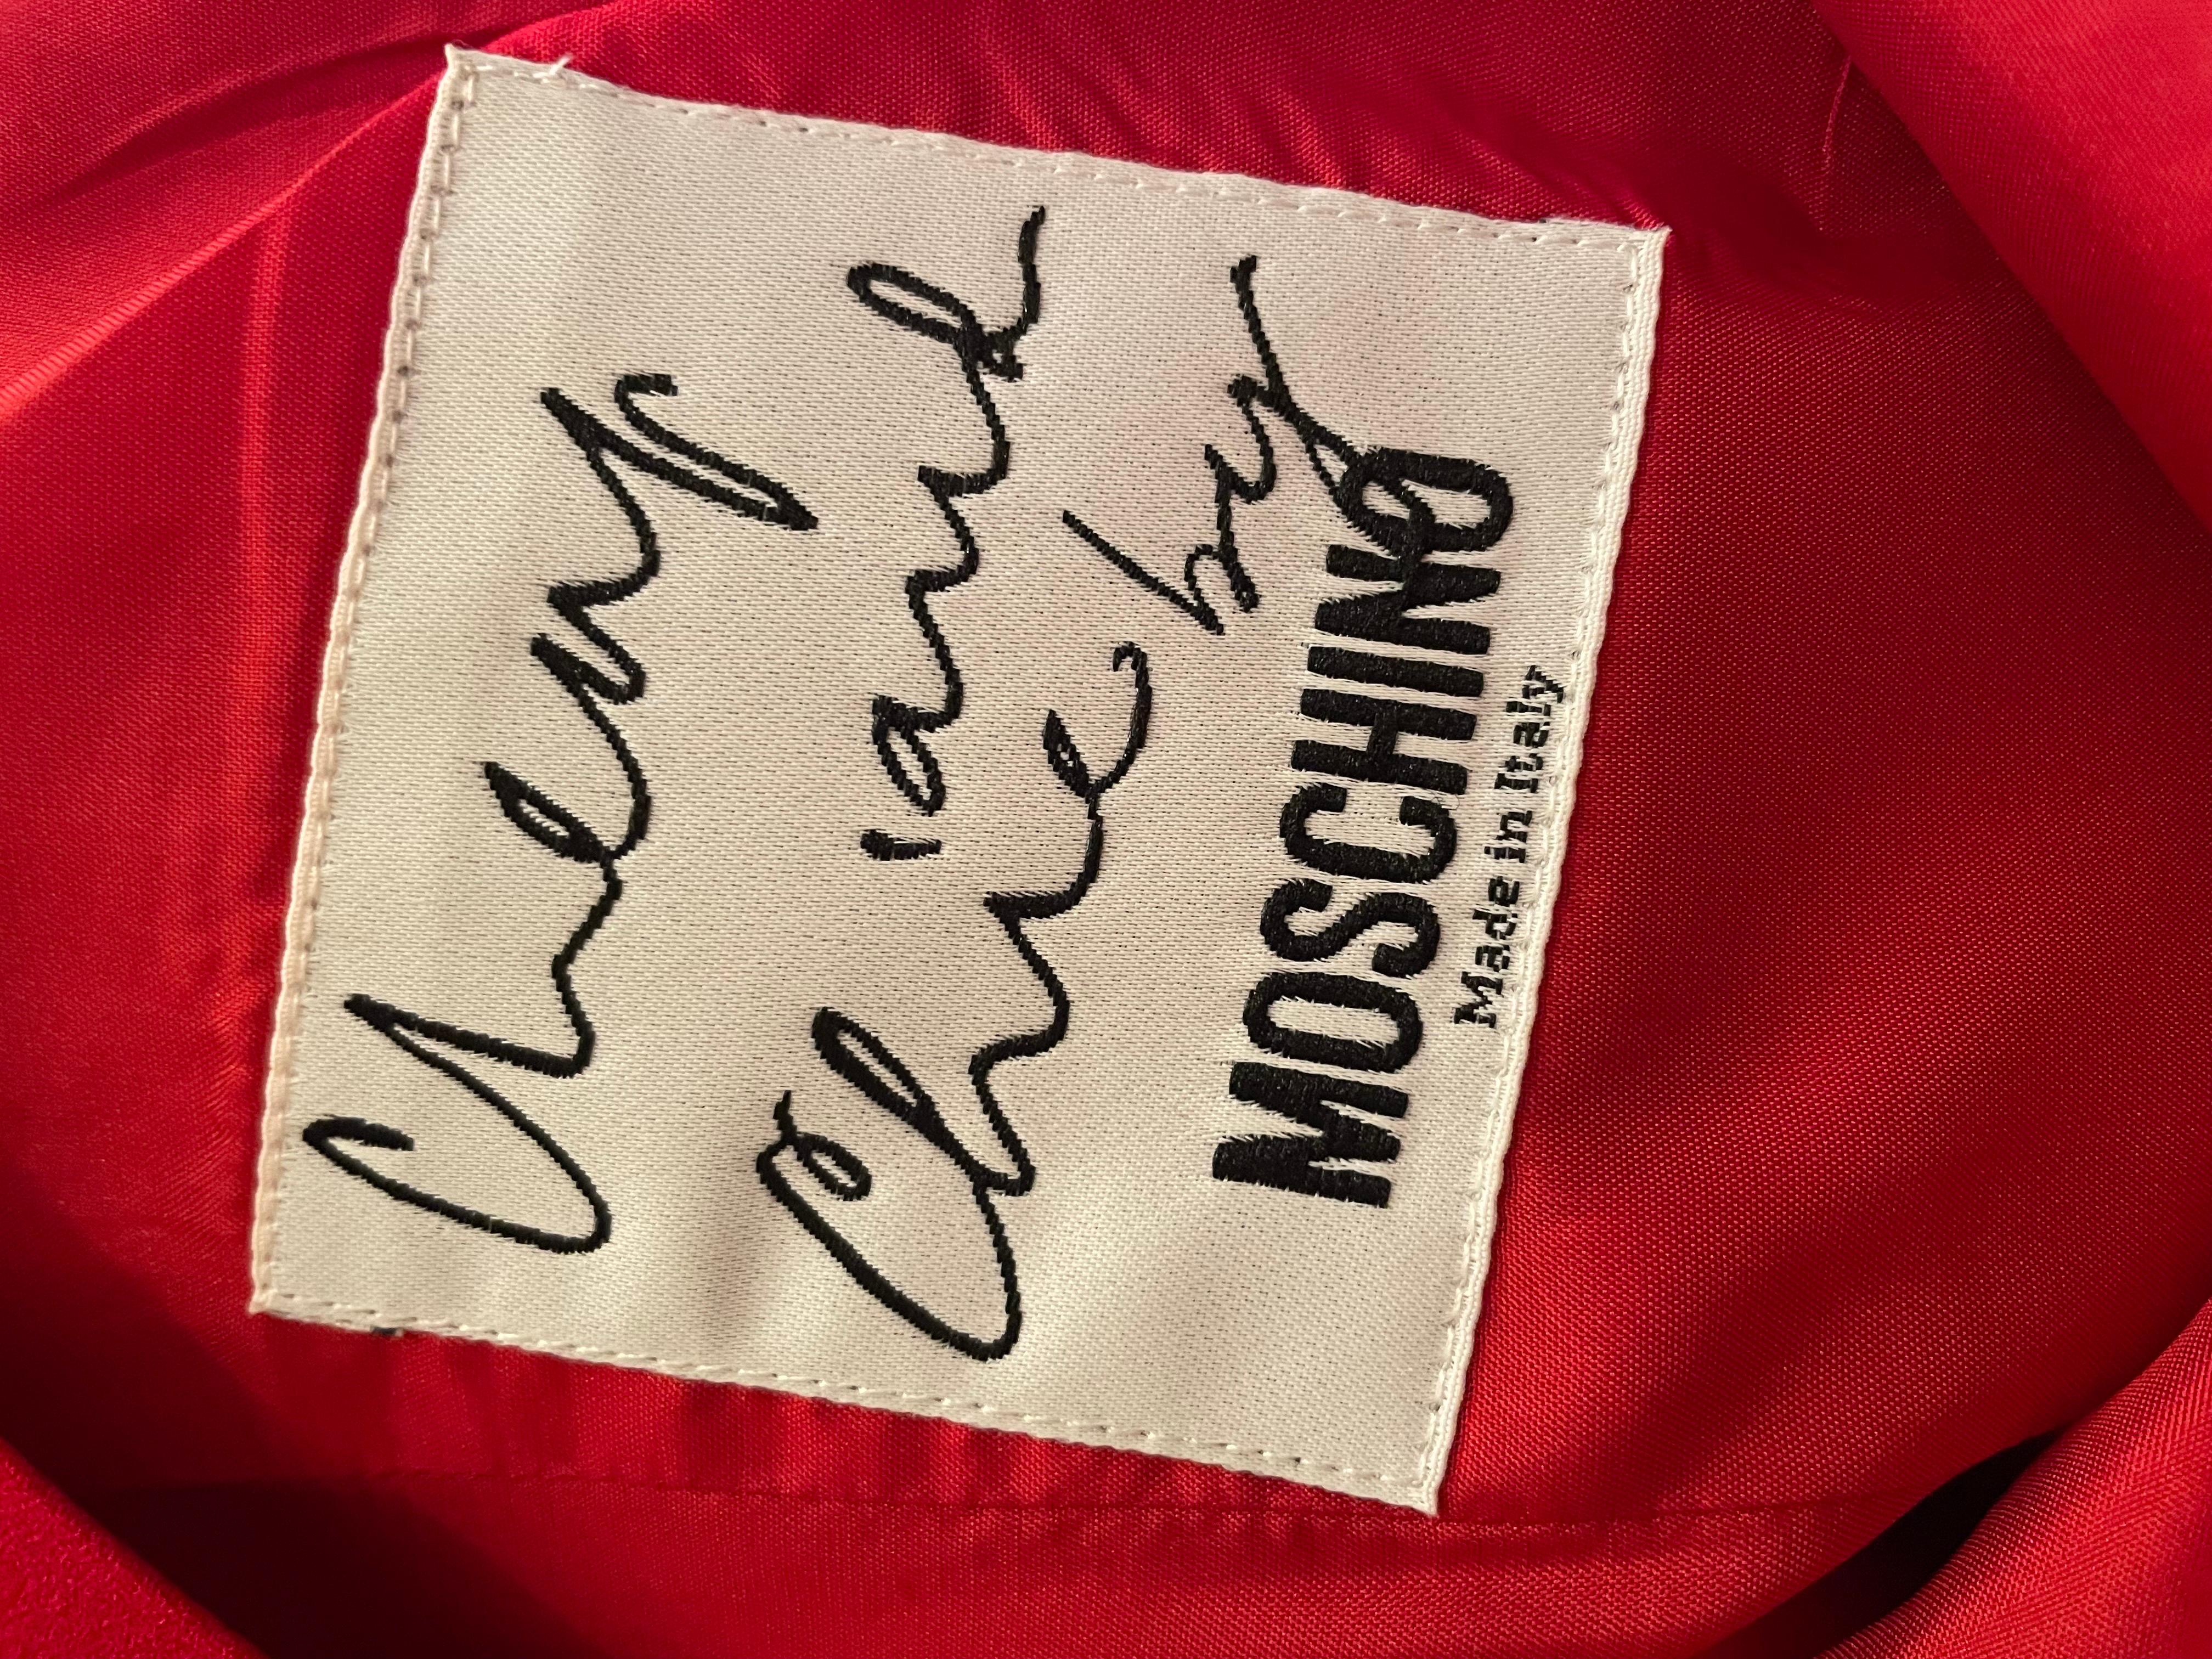 1990' vintage red dress by Moschino cheap & chic In Excellent Condition For Sale In LAGNY-SUR-MARNE, FR